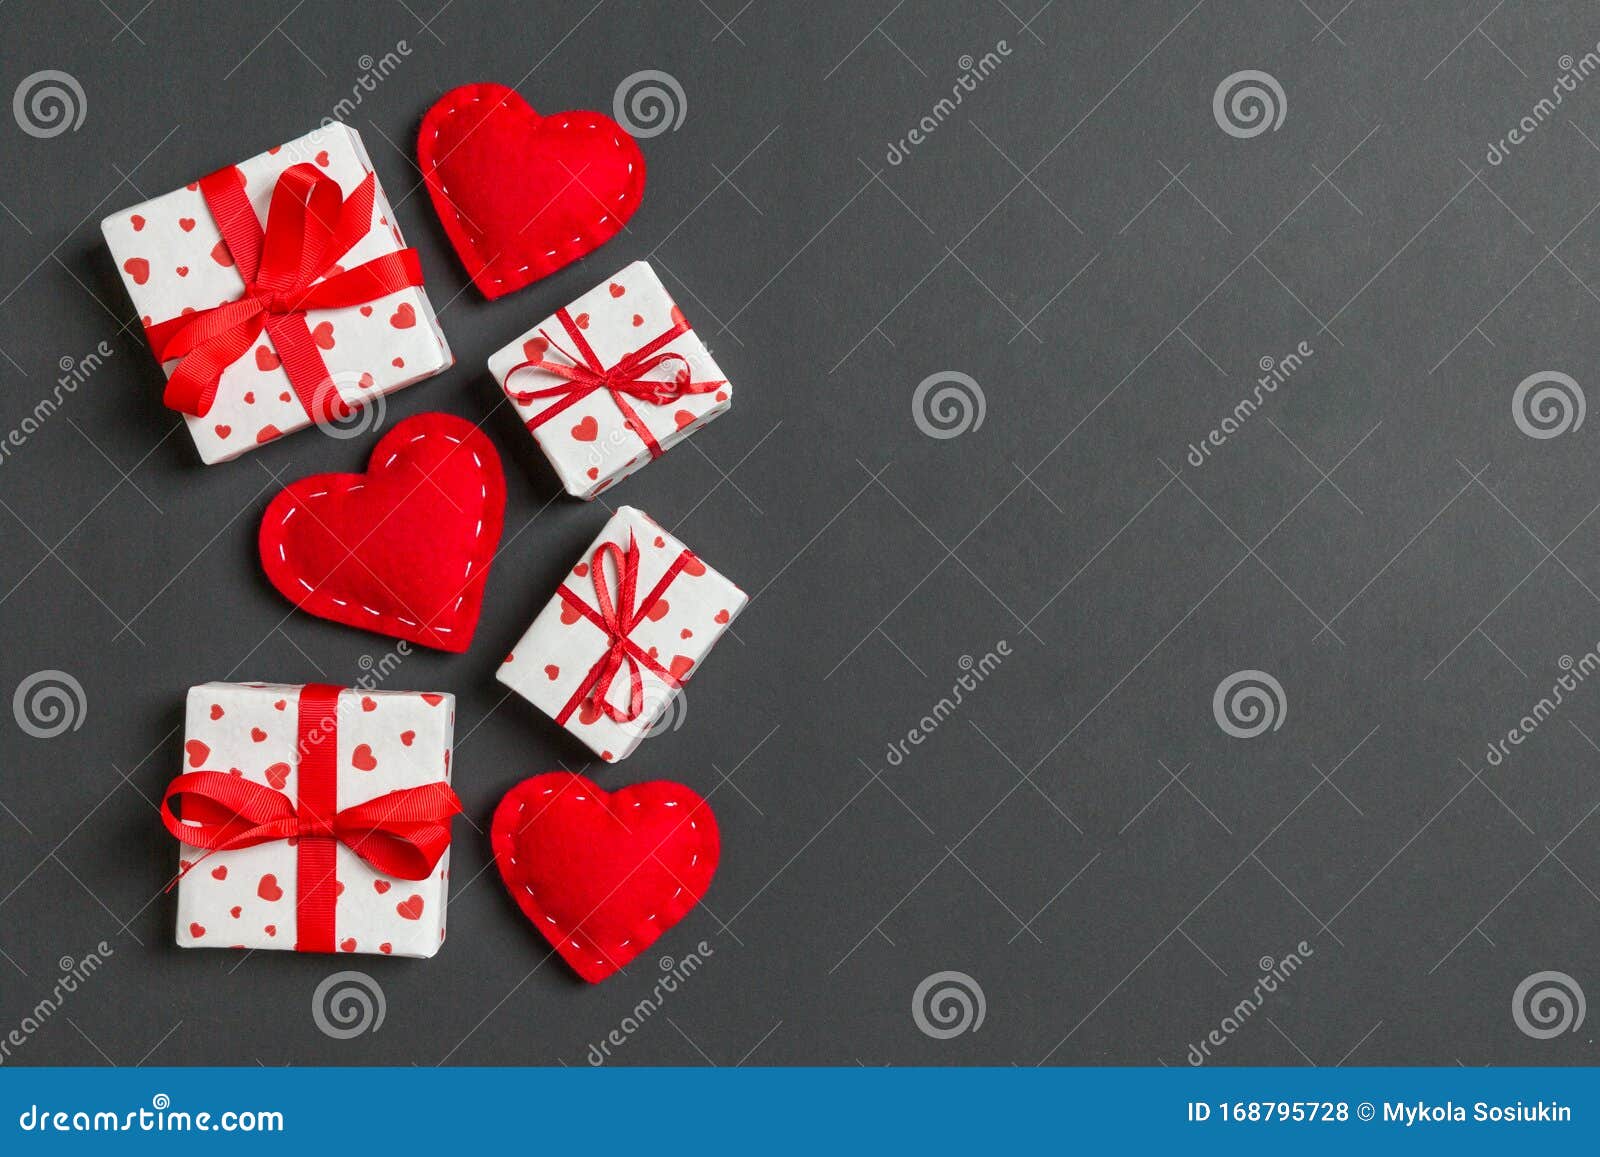 Top View of Gift Boxes and Red Textile Hearts on Colorful Background ...